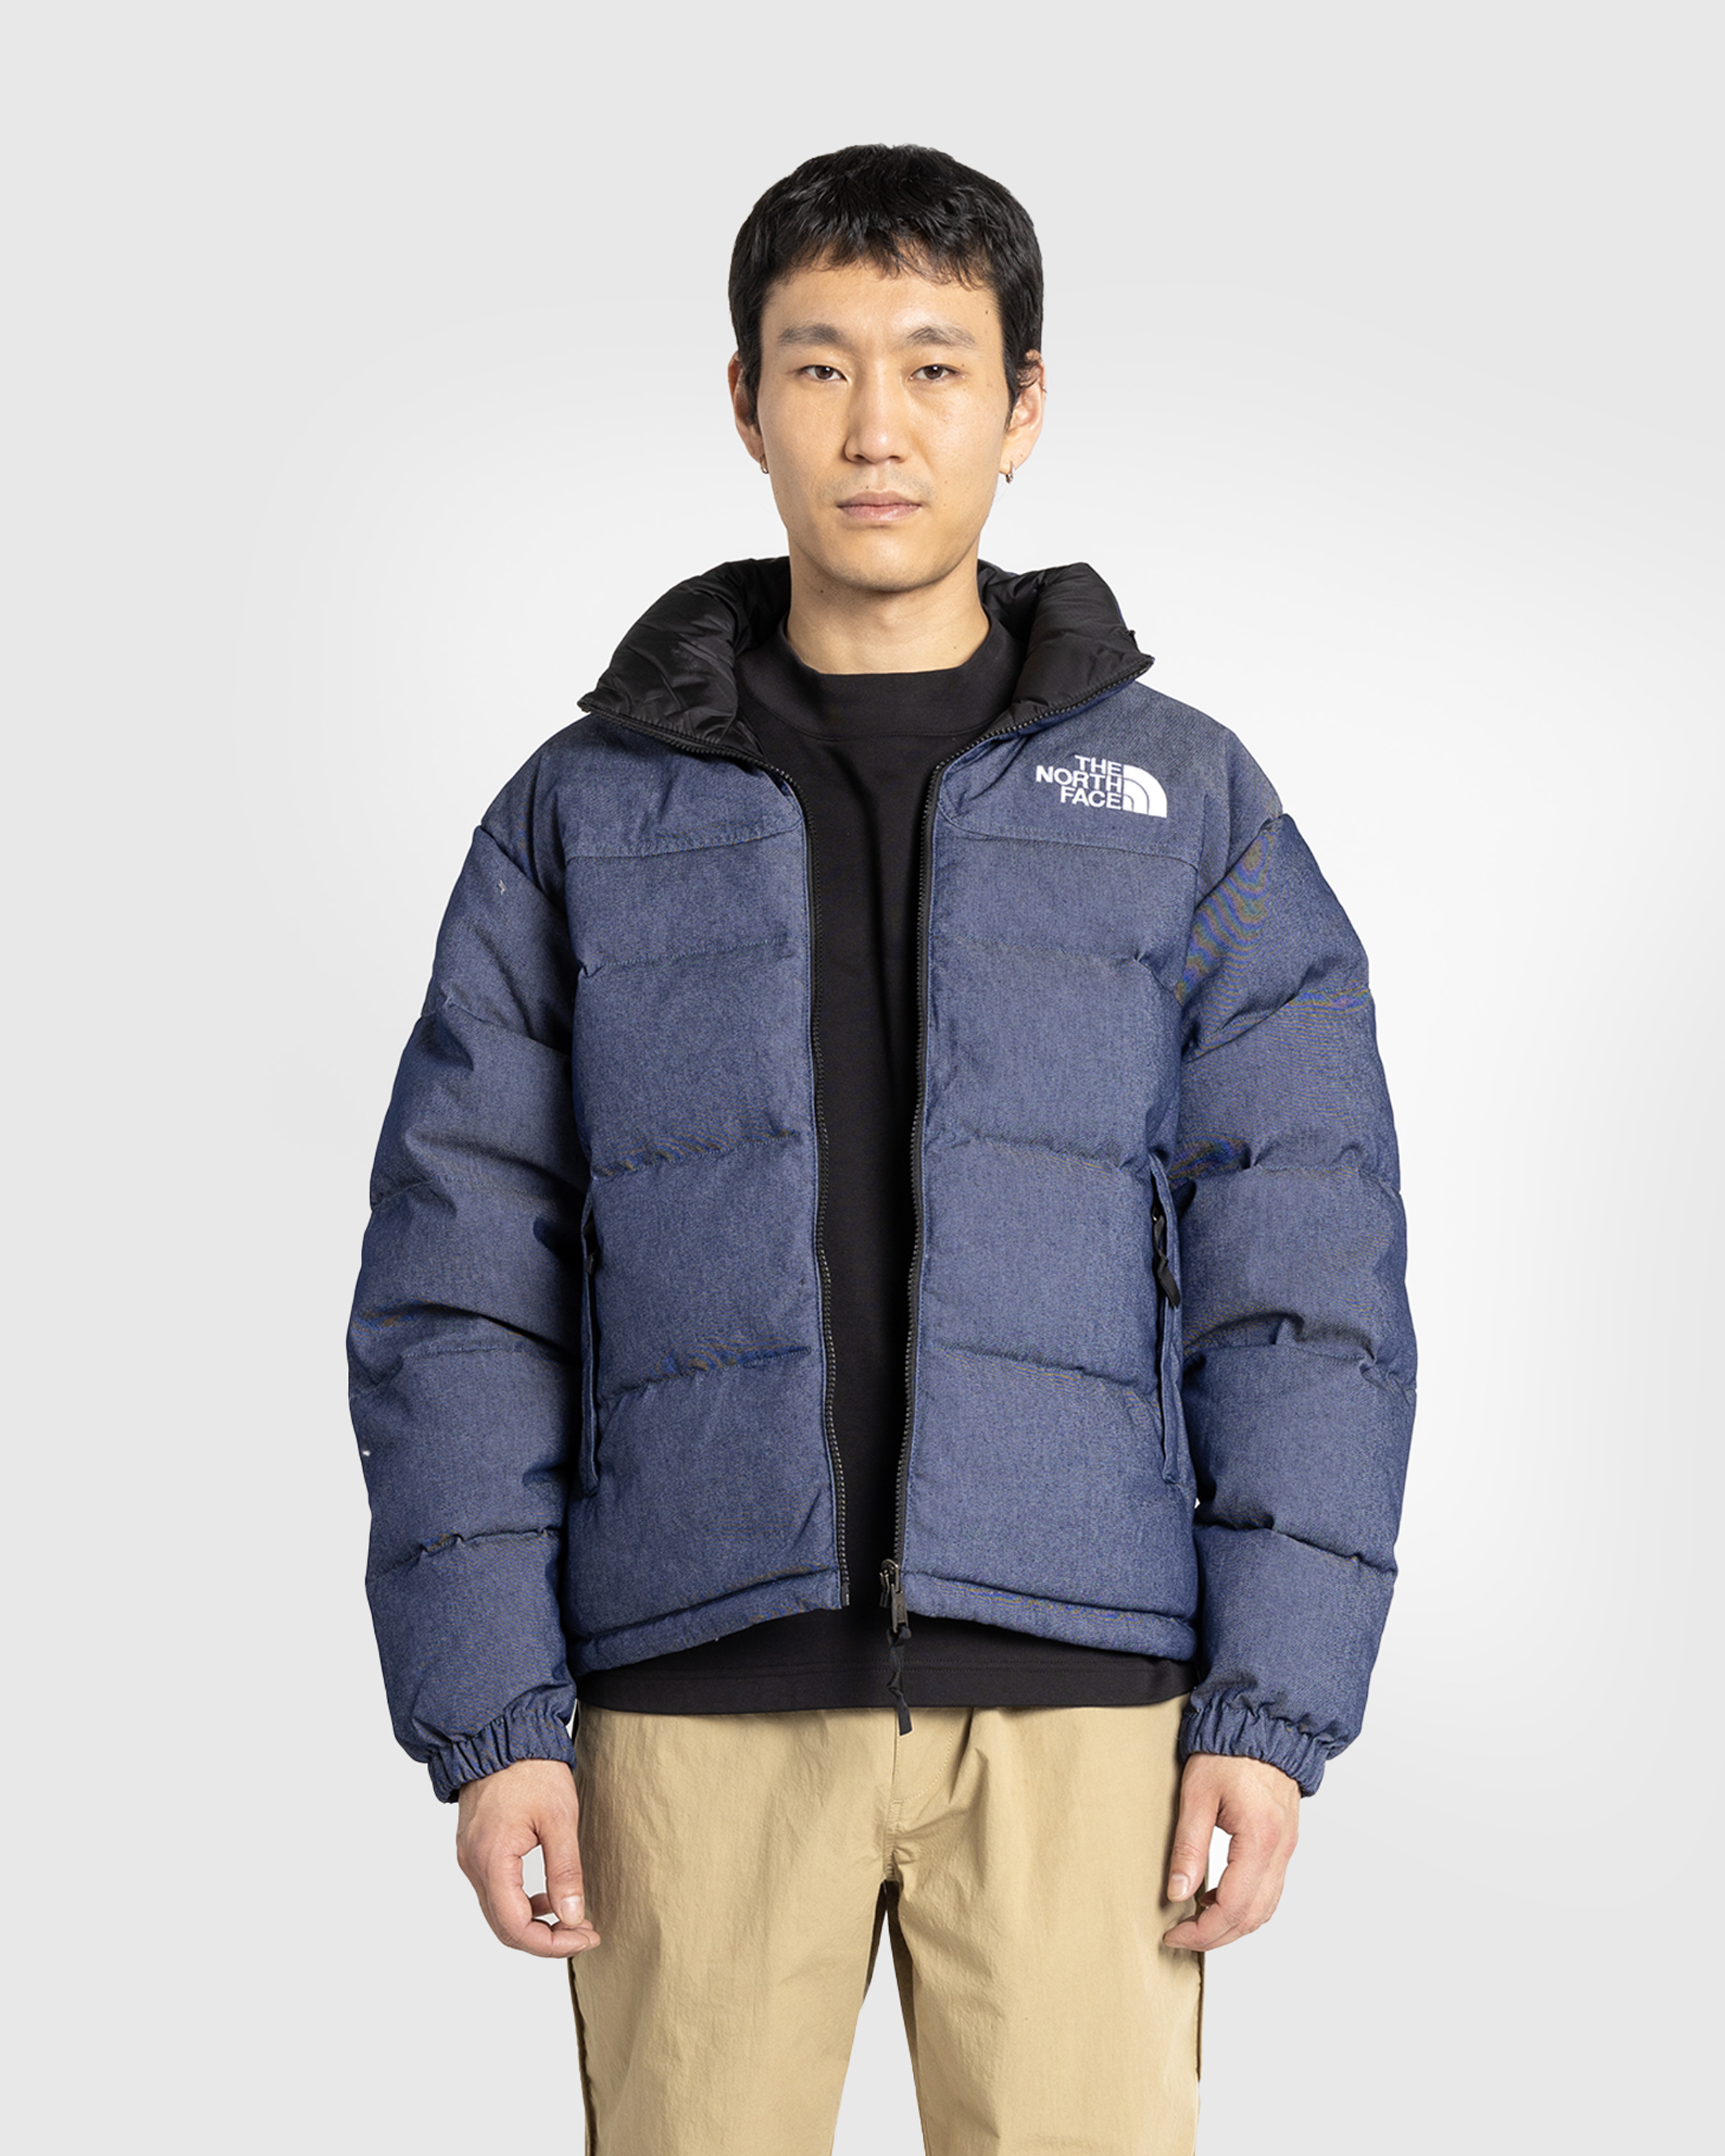 The North Face – ’92 Reversible Nuptse Jacket Sulphur Moss/Coal Brown-2 - Outerwear - Blue - Image 3